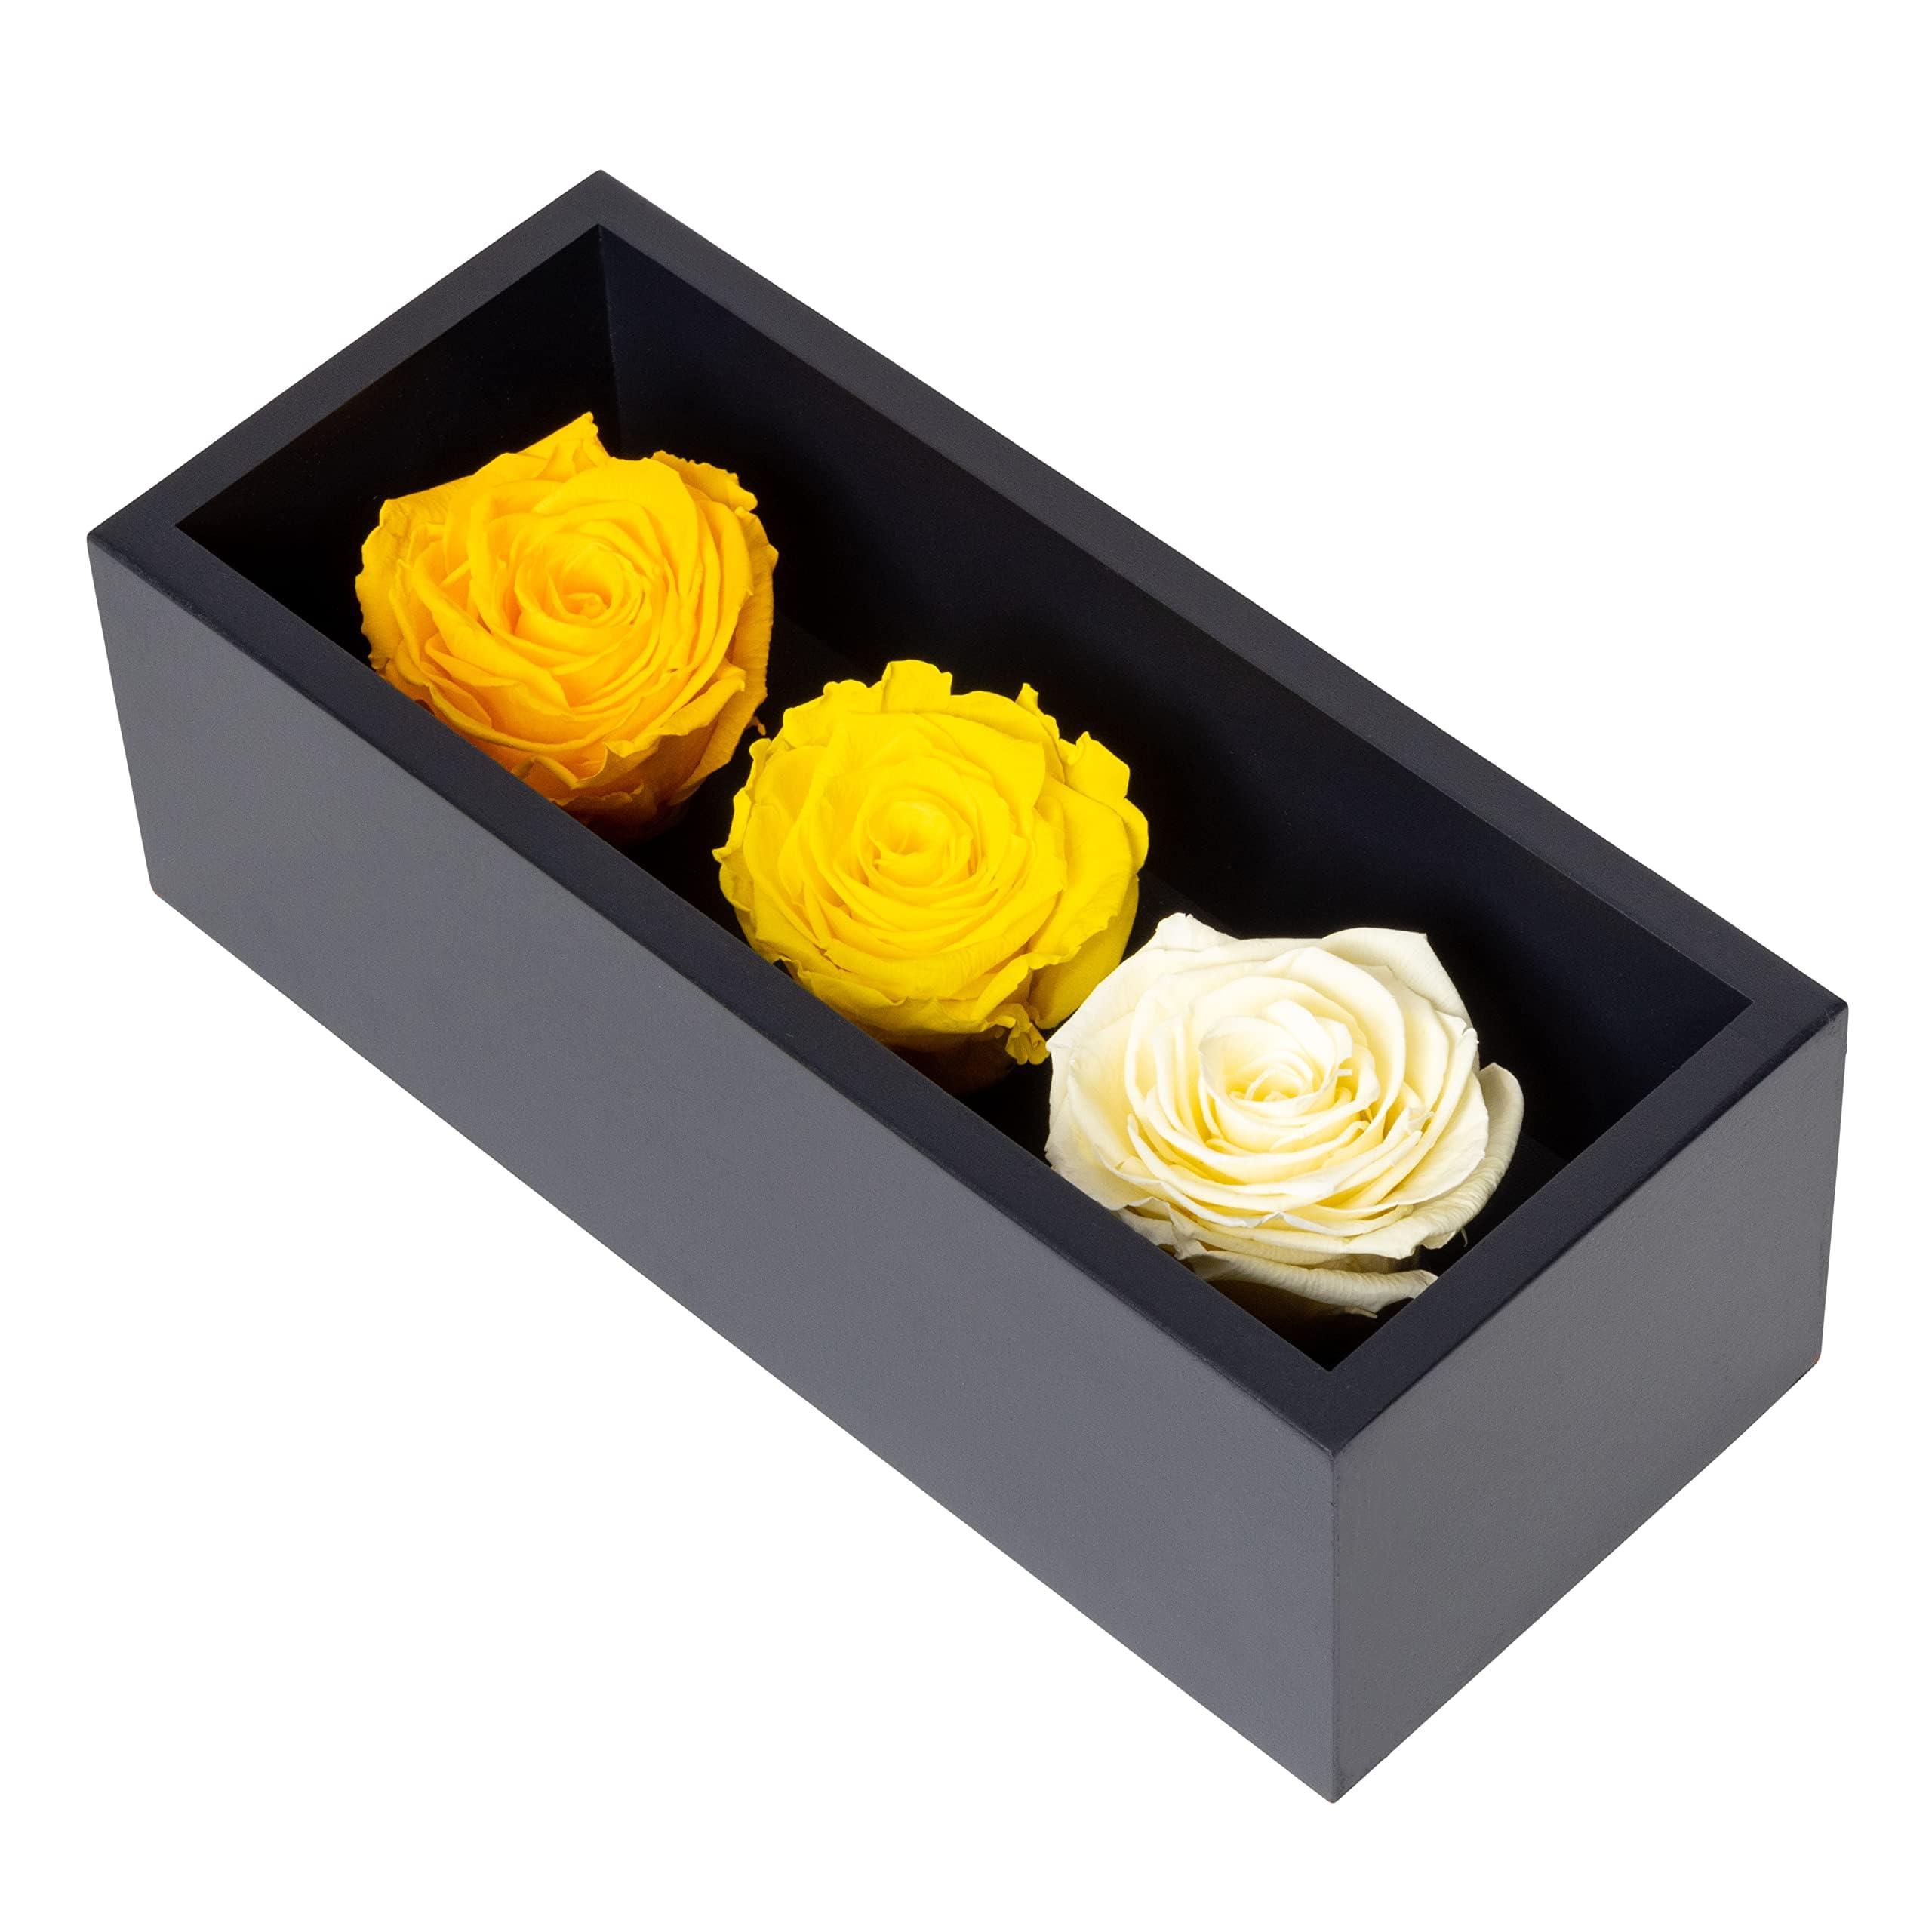 Khiva Graduation Preserved Roses in Wood Box, 3 Yellow Birthday Flowers for Delivery Prime, Everlasting Flowers, Natural Forever Roses That Last for Years, Eternal Rose, Gift Delivery for Mum 0